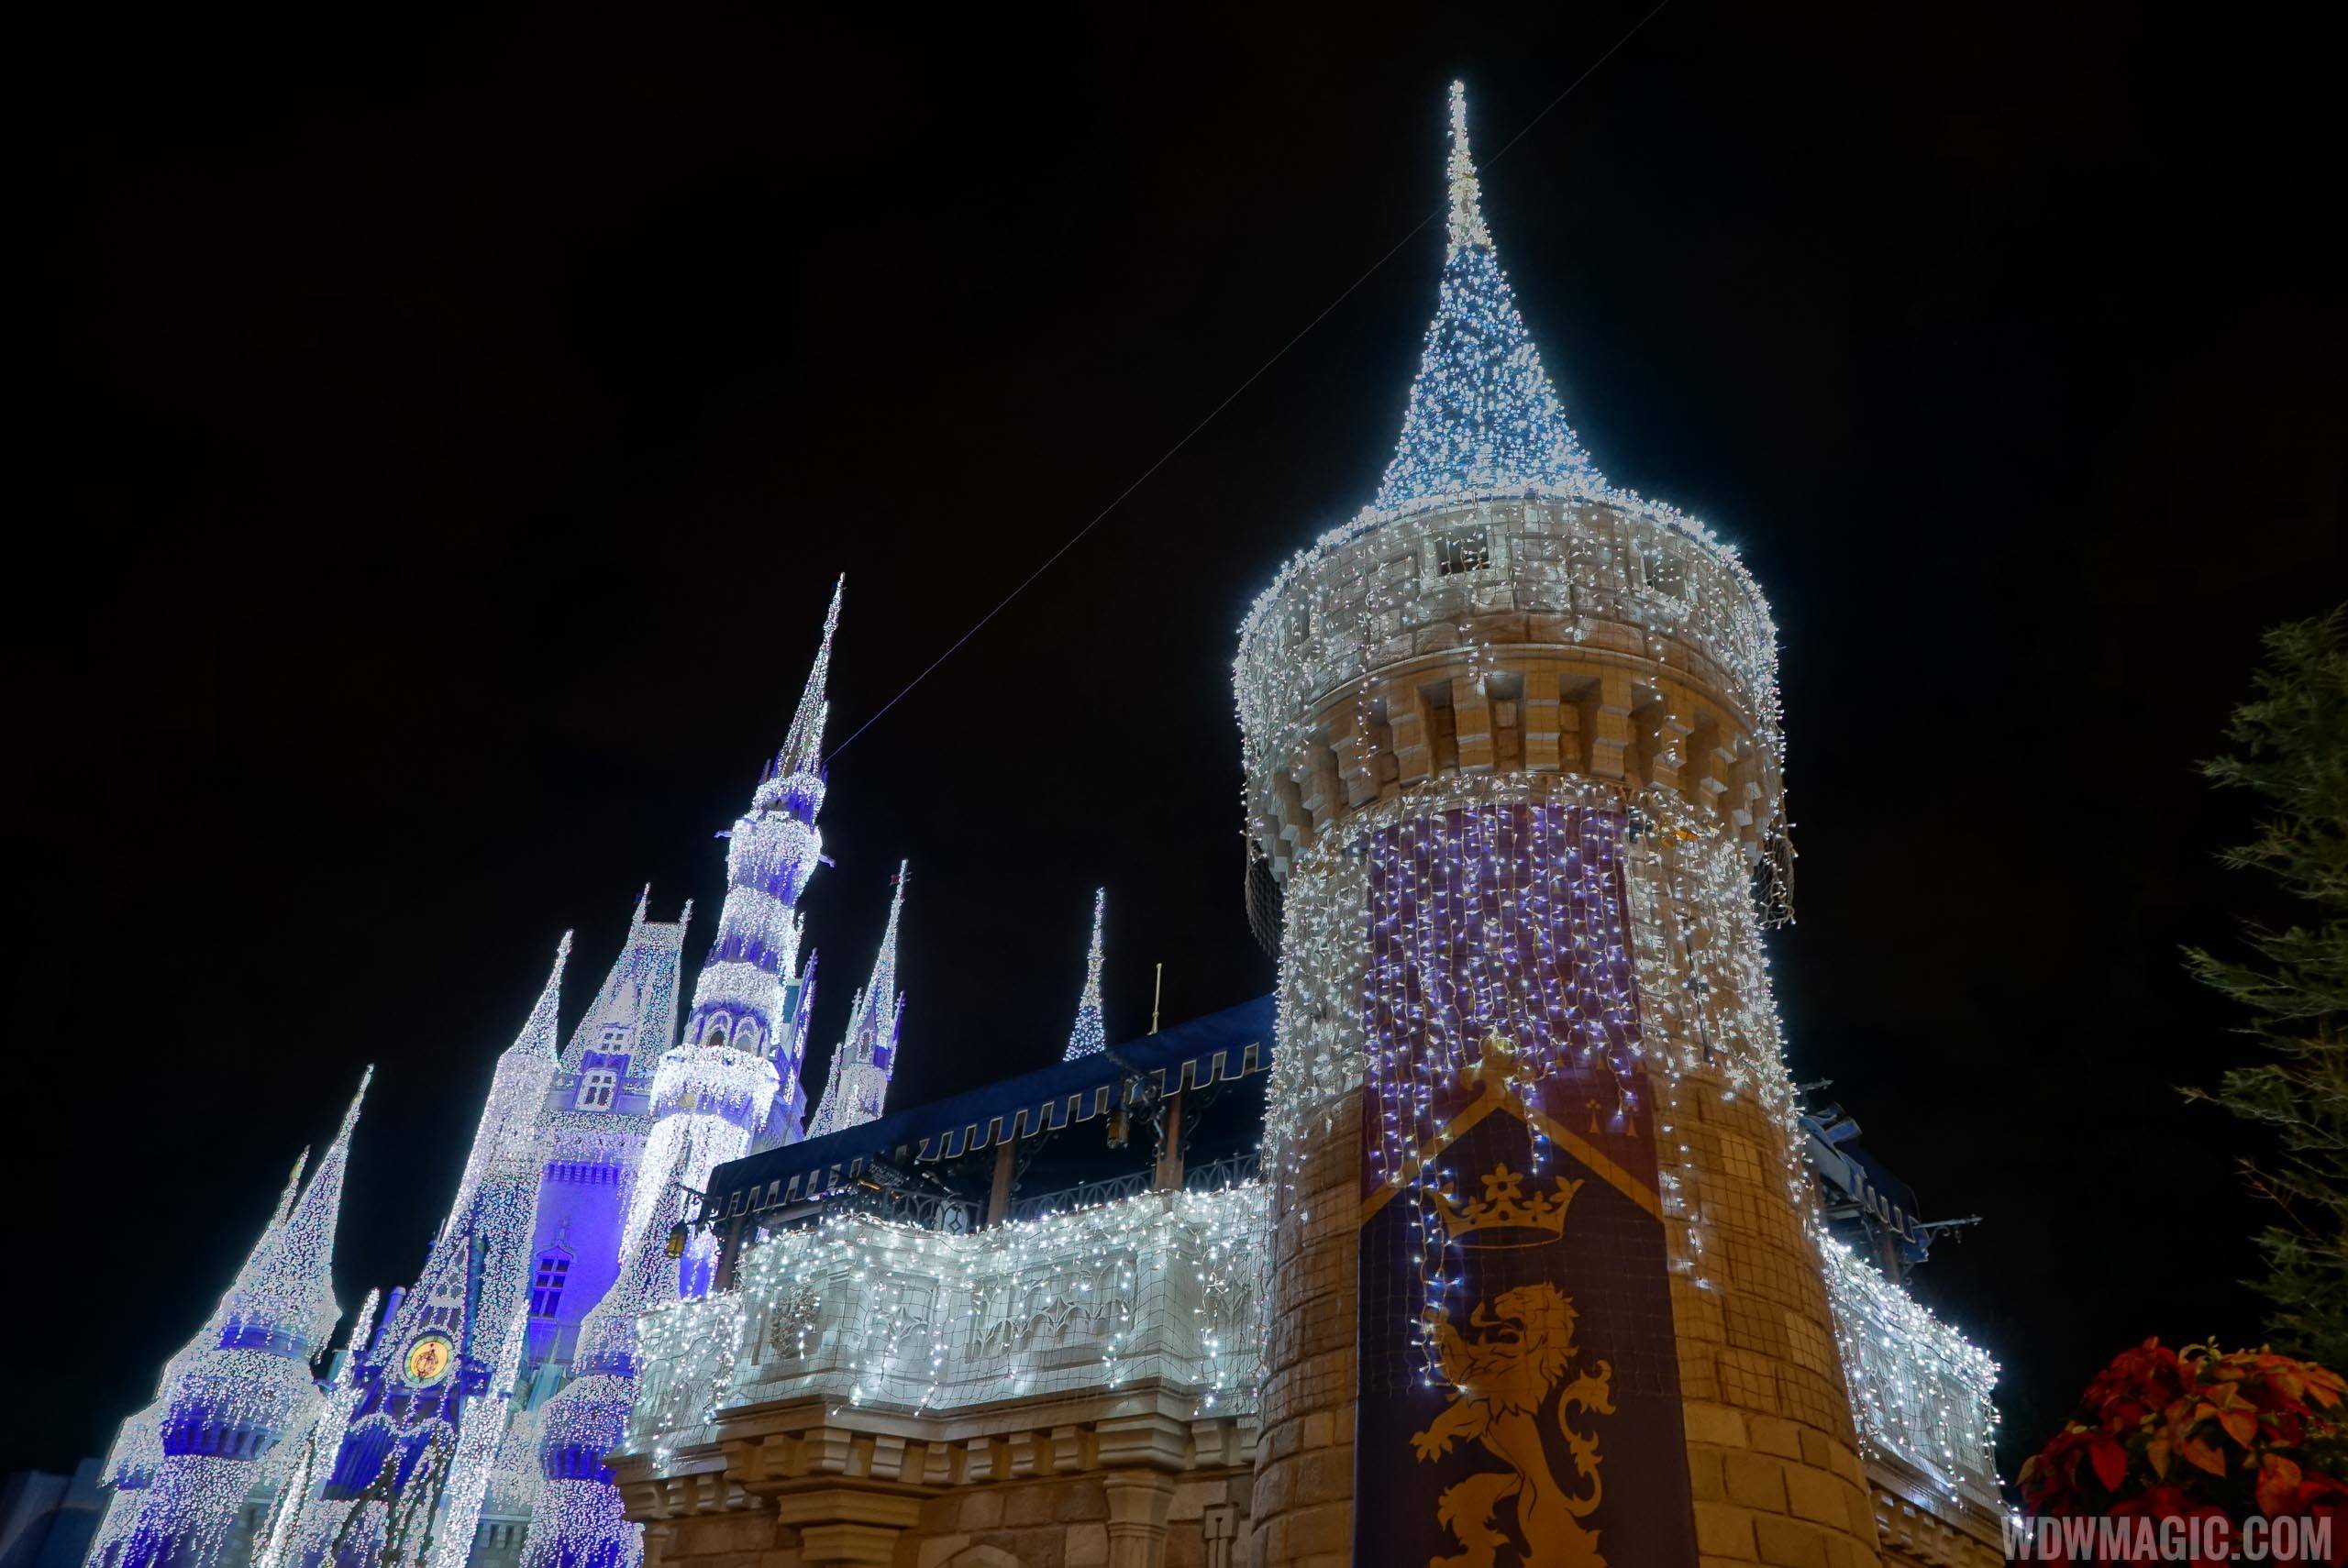 Castle Dreamlights on the new turrets